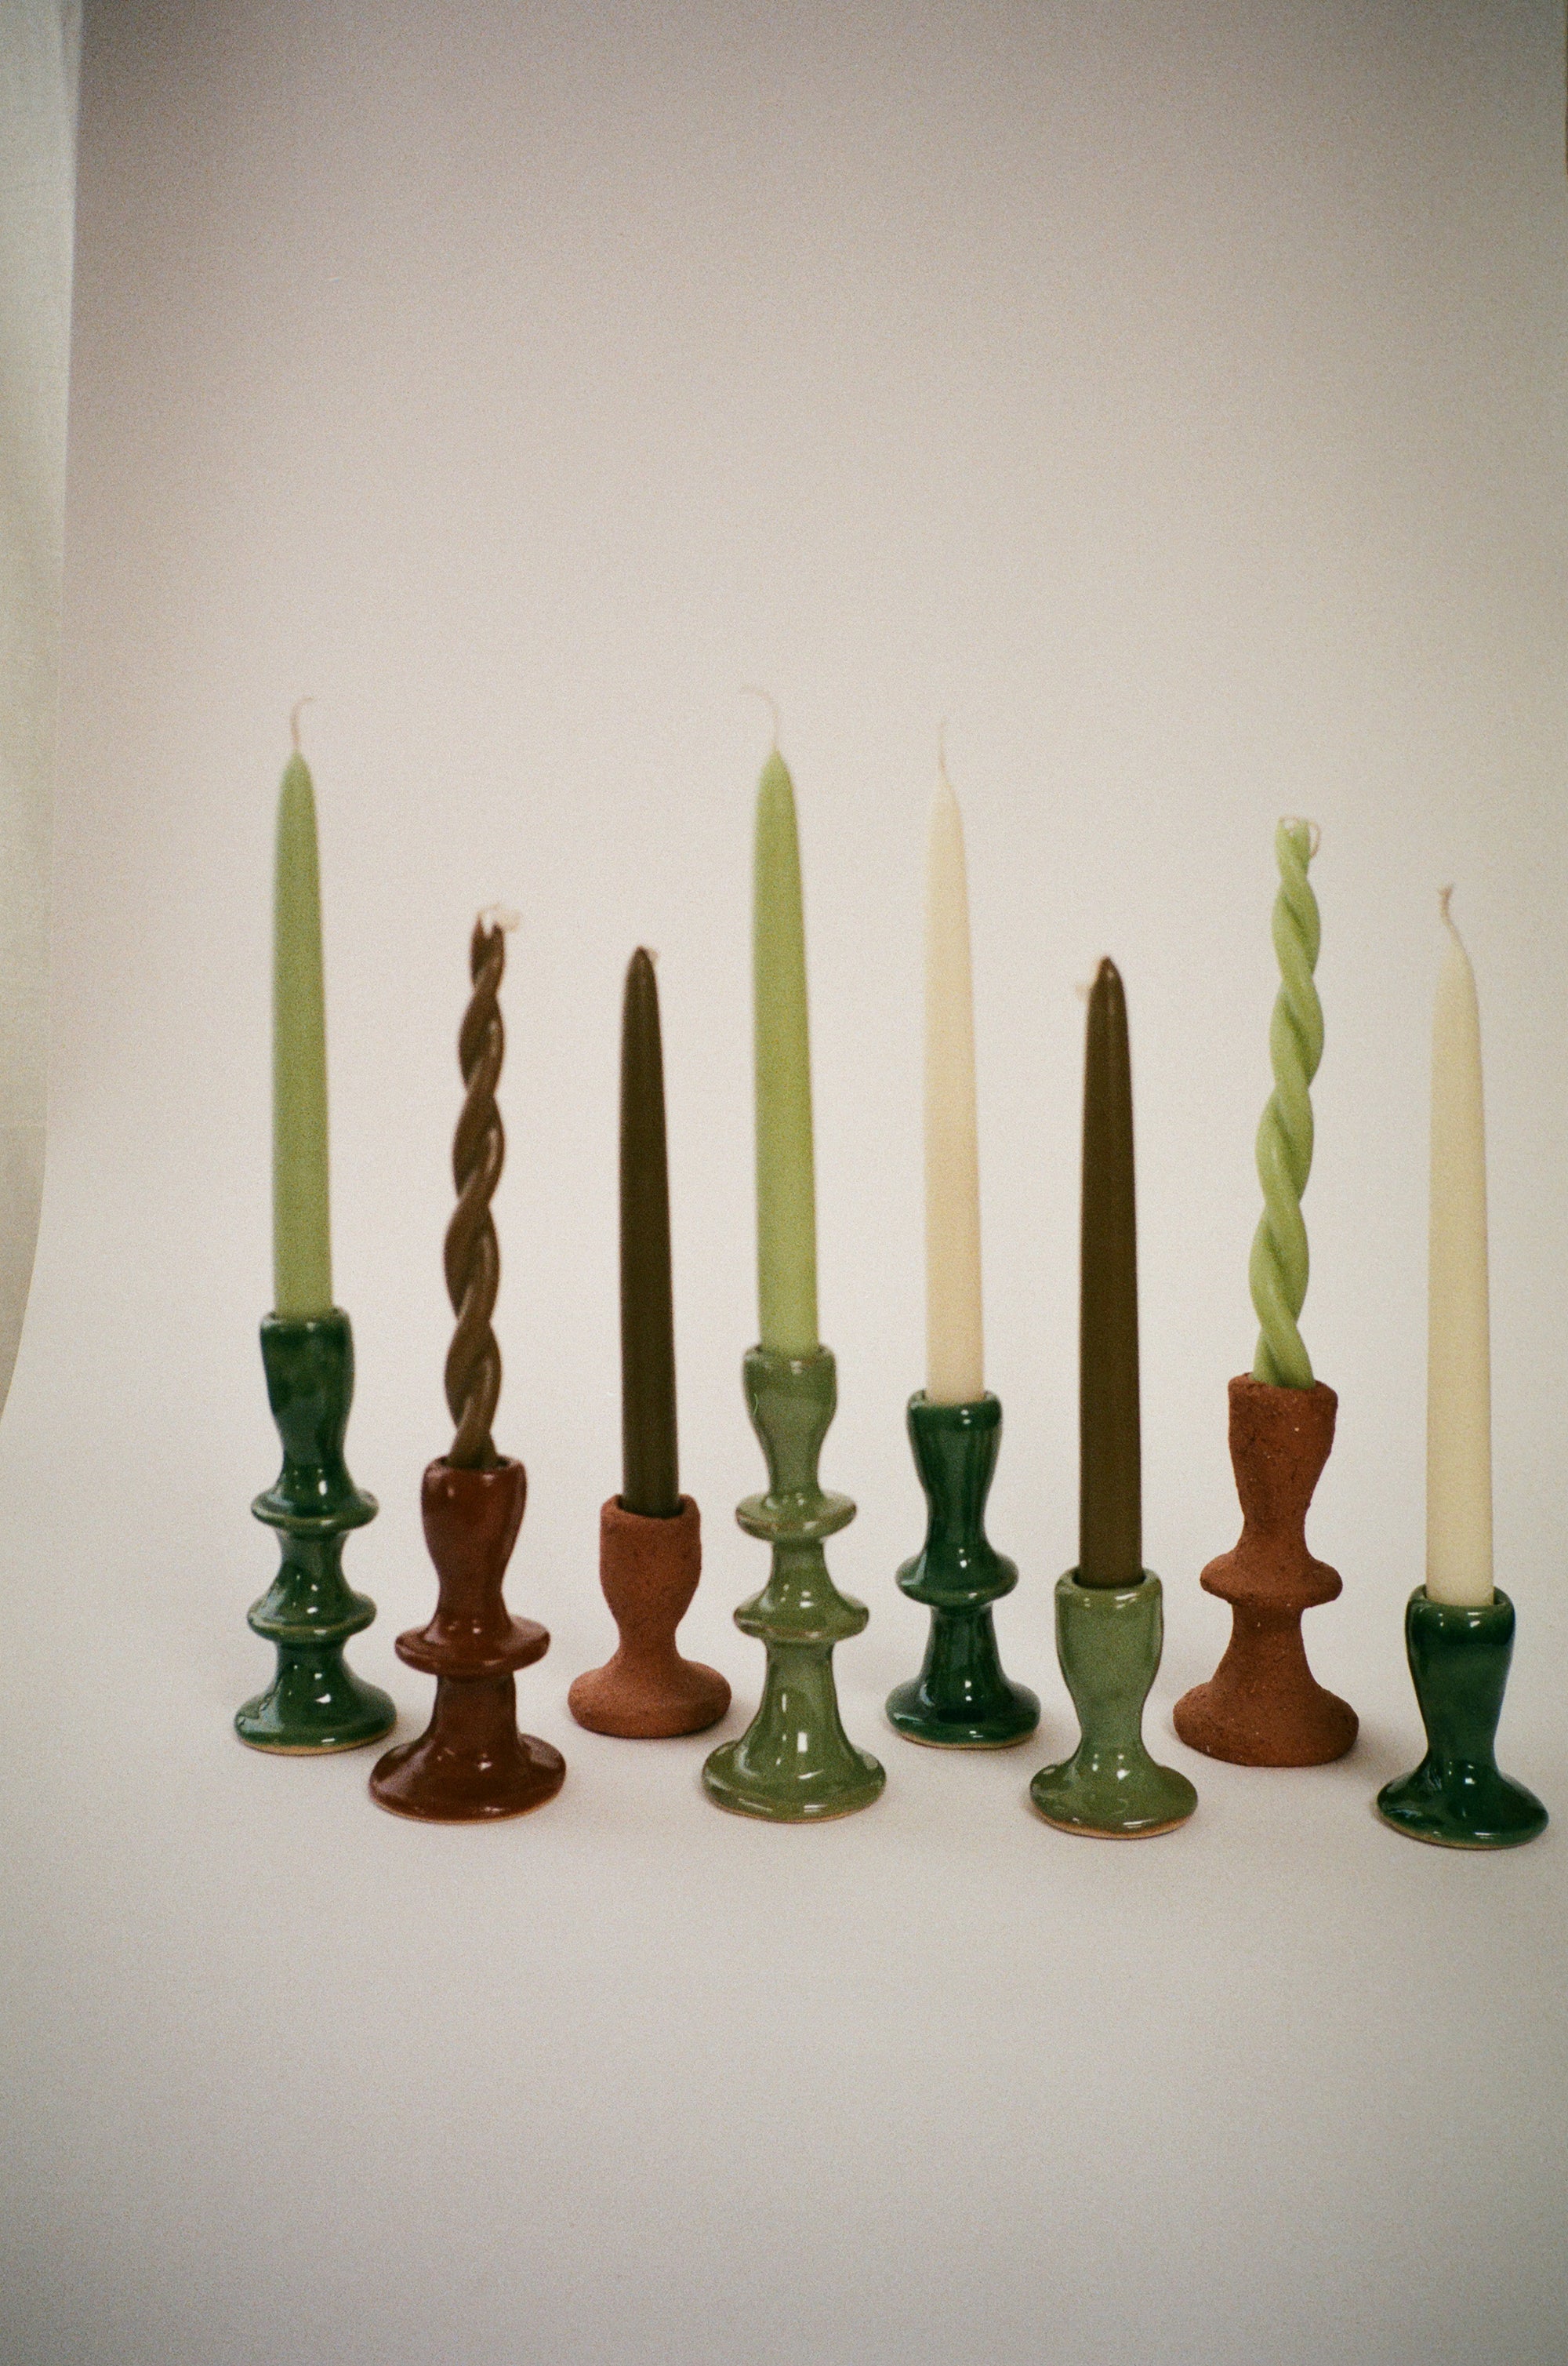 Jade Paton Candle Holders - Bright Green